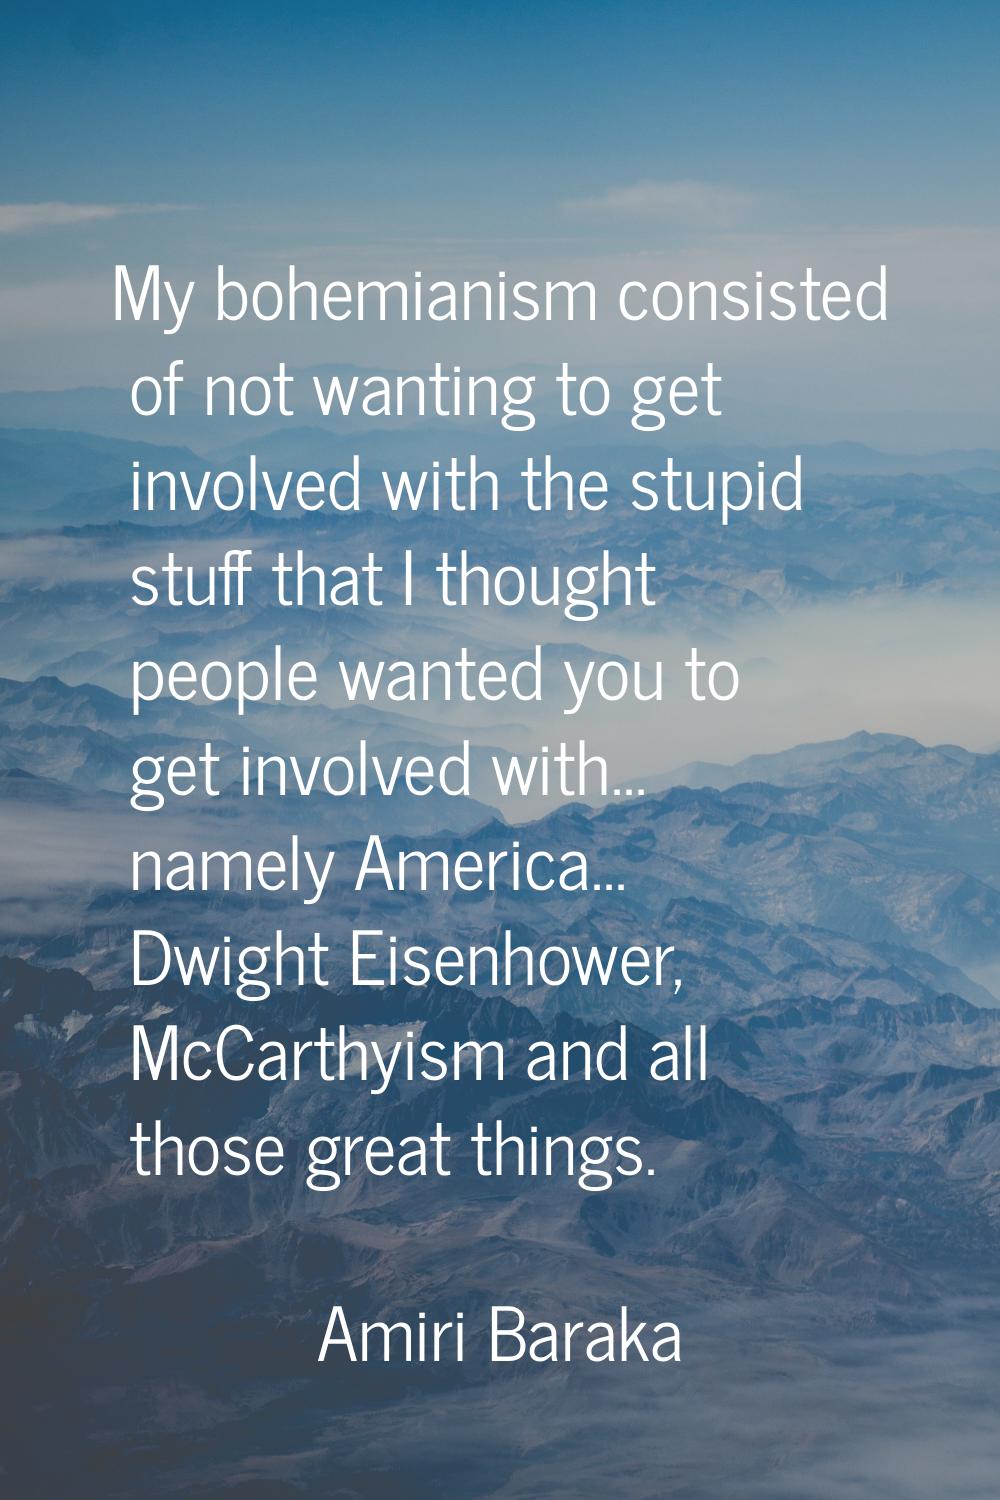 My bohemianism consisted of not wanting to get involved with the stupid stuff that I thought people